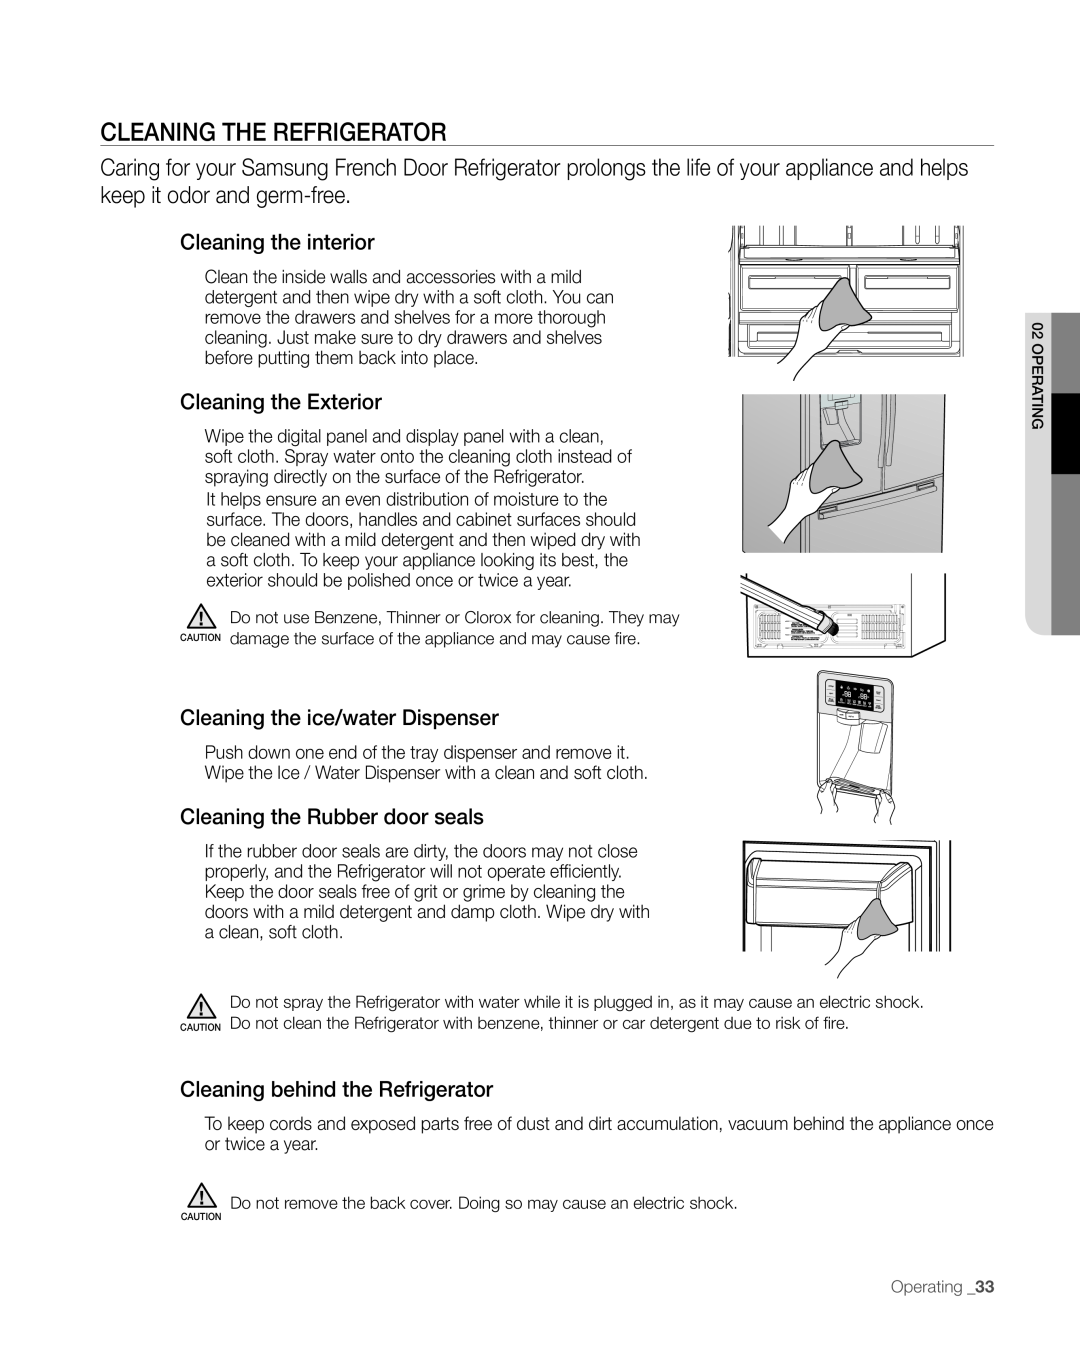 Sears RFG297AA CLEAninG tHE REFRiGERAtoR, Cleaning the interior, Cleaning the Exterior, Cleaning the ice/water Dispenser 